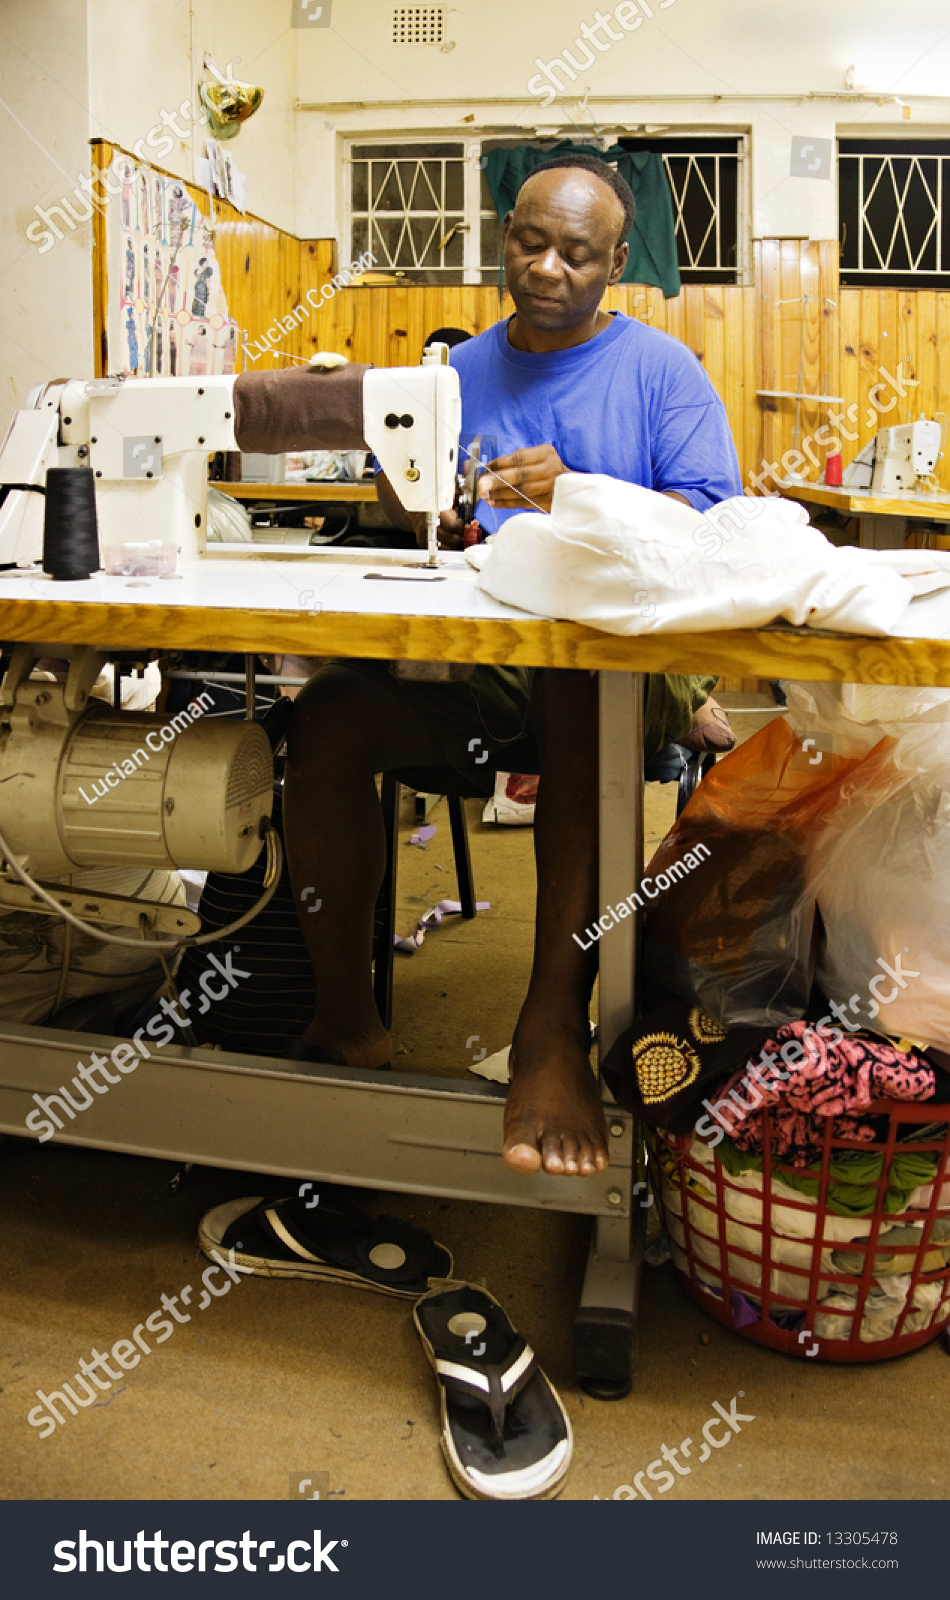 African Man Sewing In A Small Tailor Shop, Industrial Sewing Machine